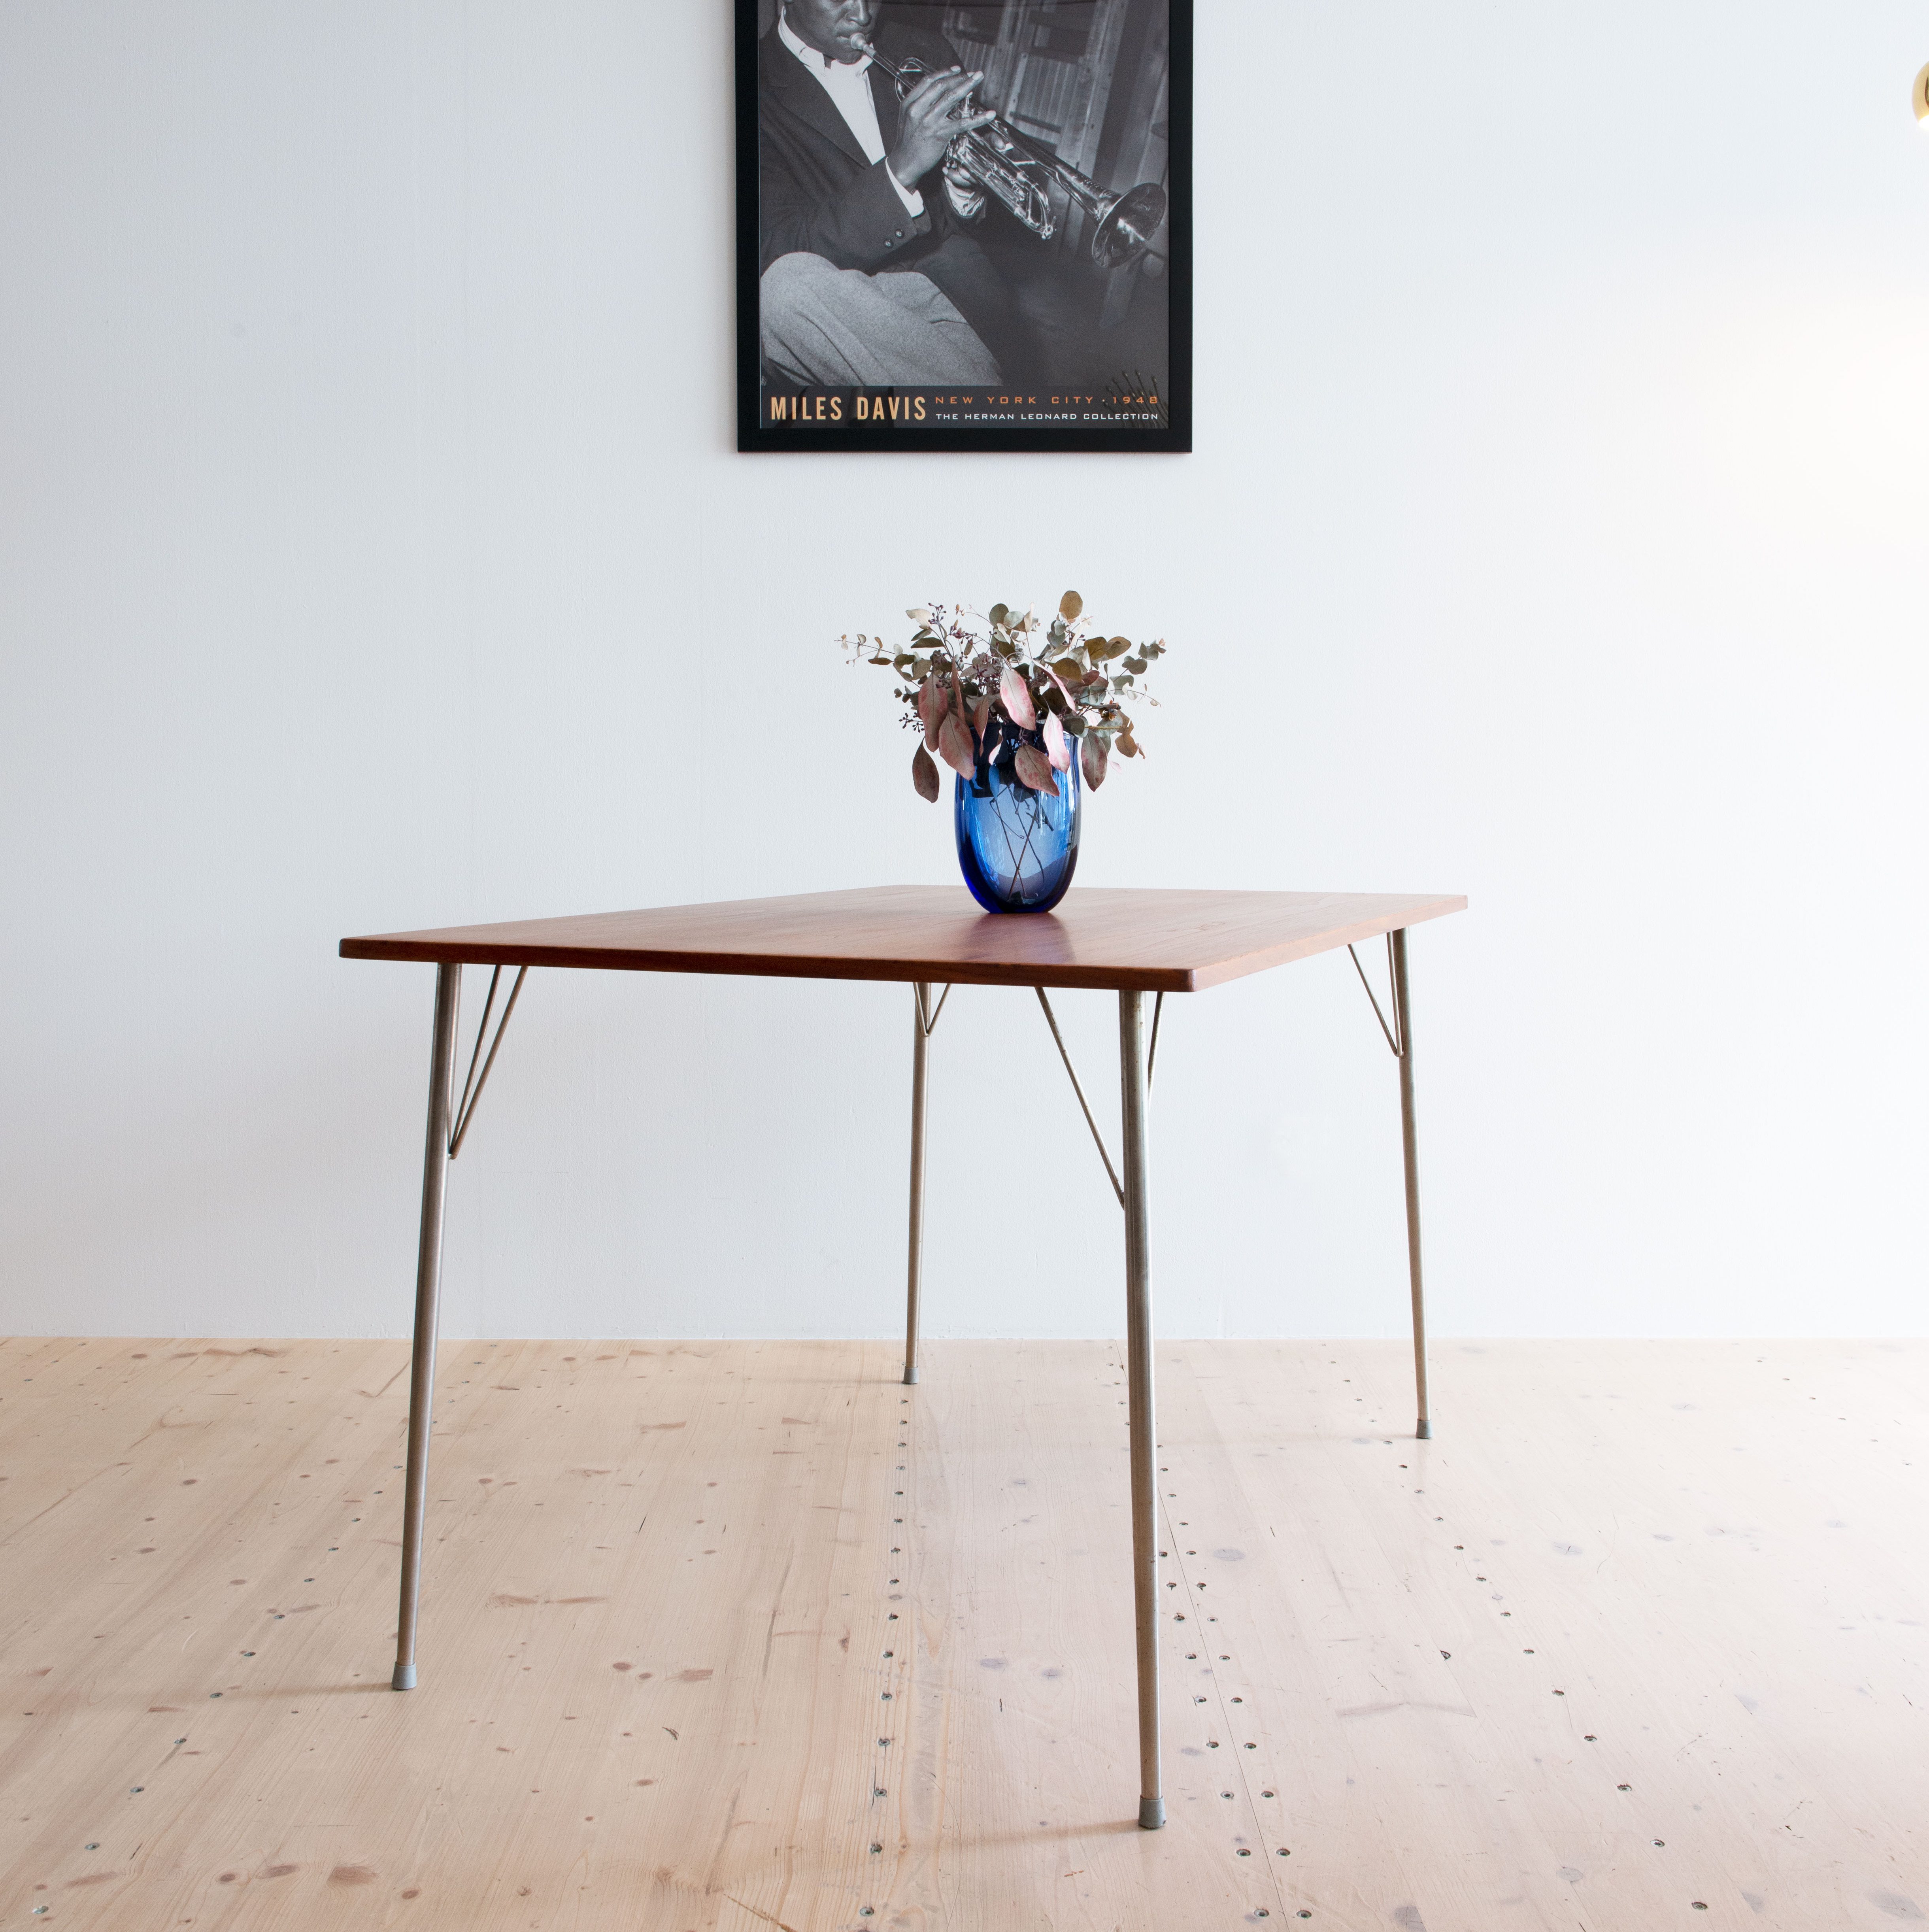 Arne Jacobsen Style Teak Dining Table. Produced in Denmark in the 1960s. Available at heyday möbel, Grubenstrasse 19, 8045 Zürich, Switzerland.